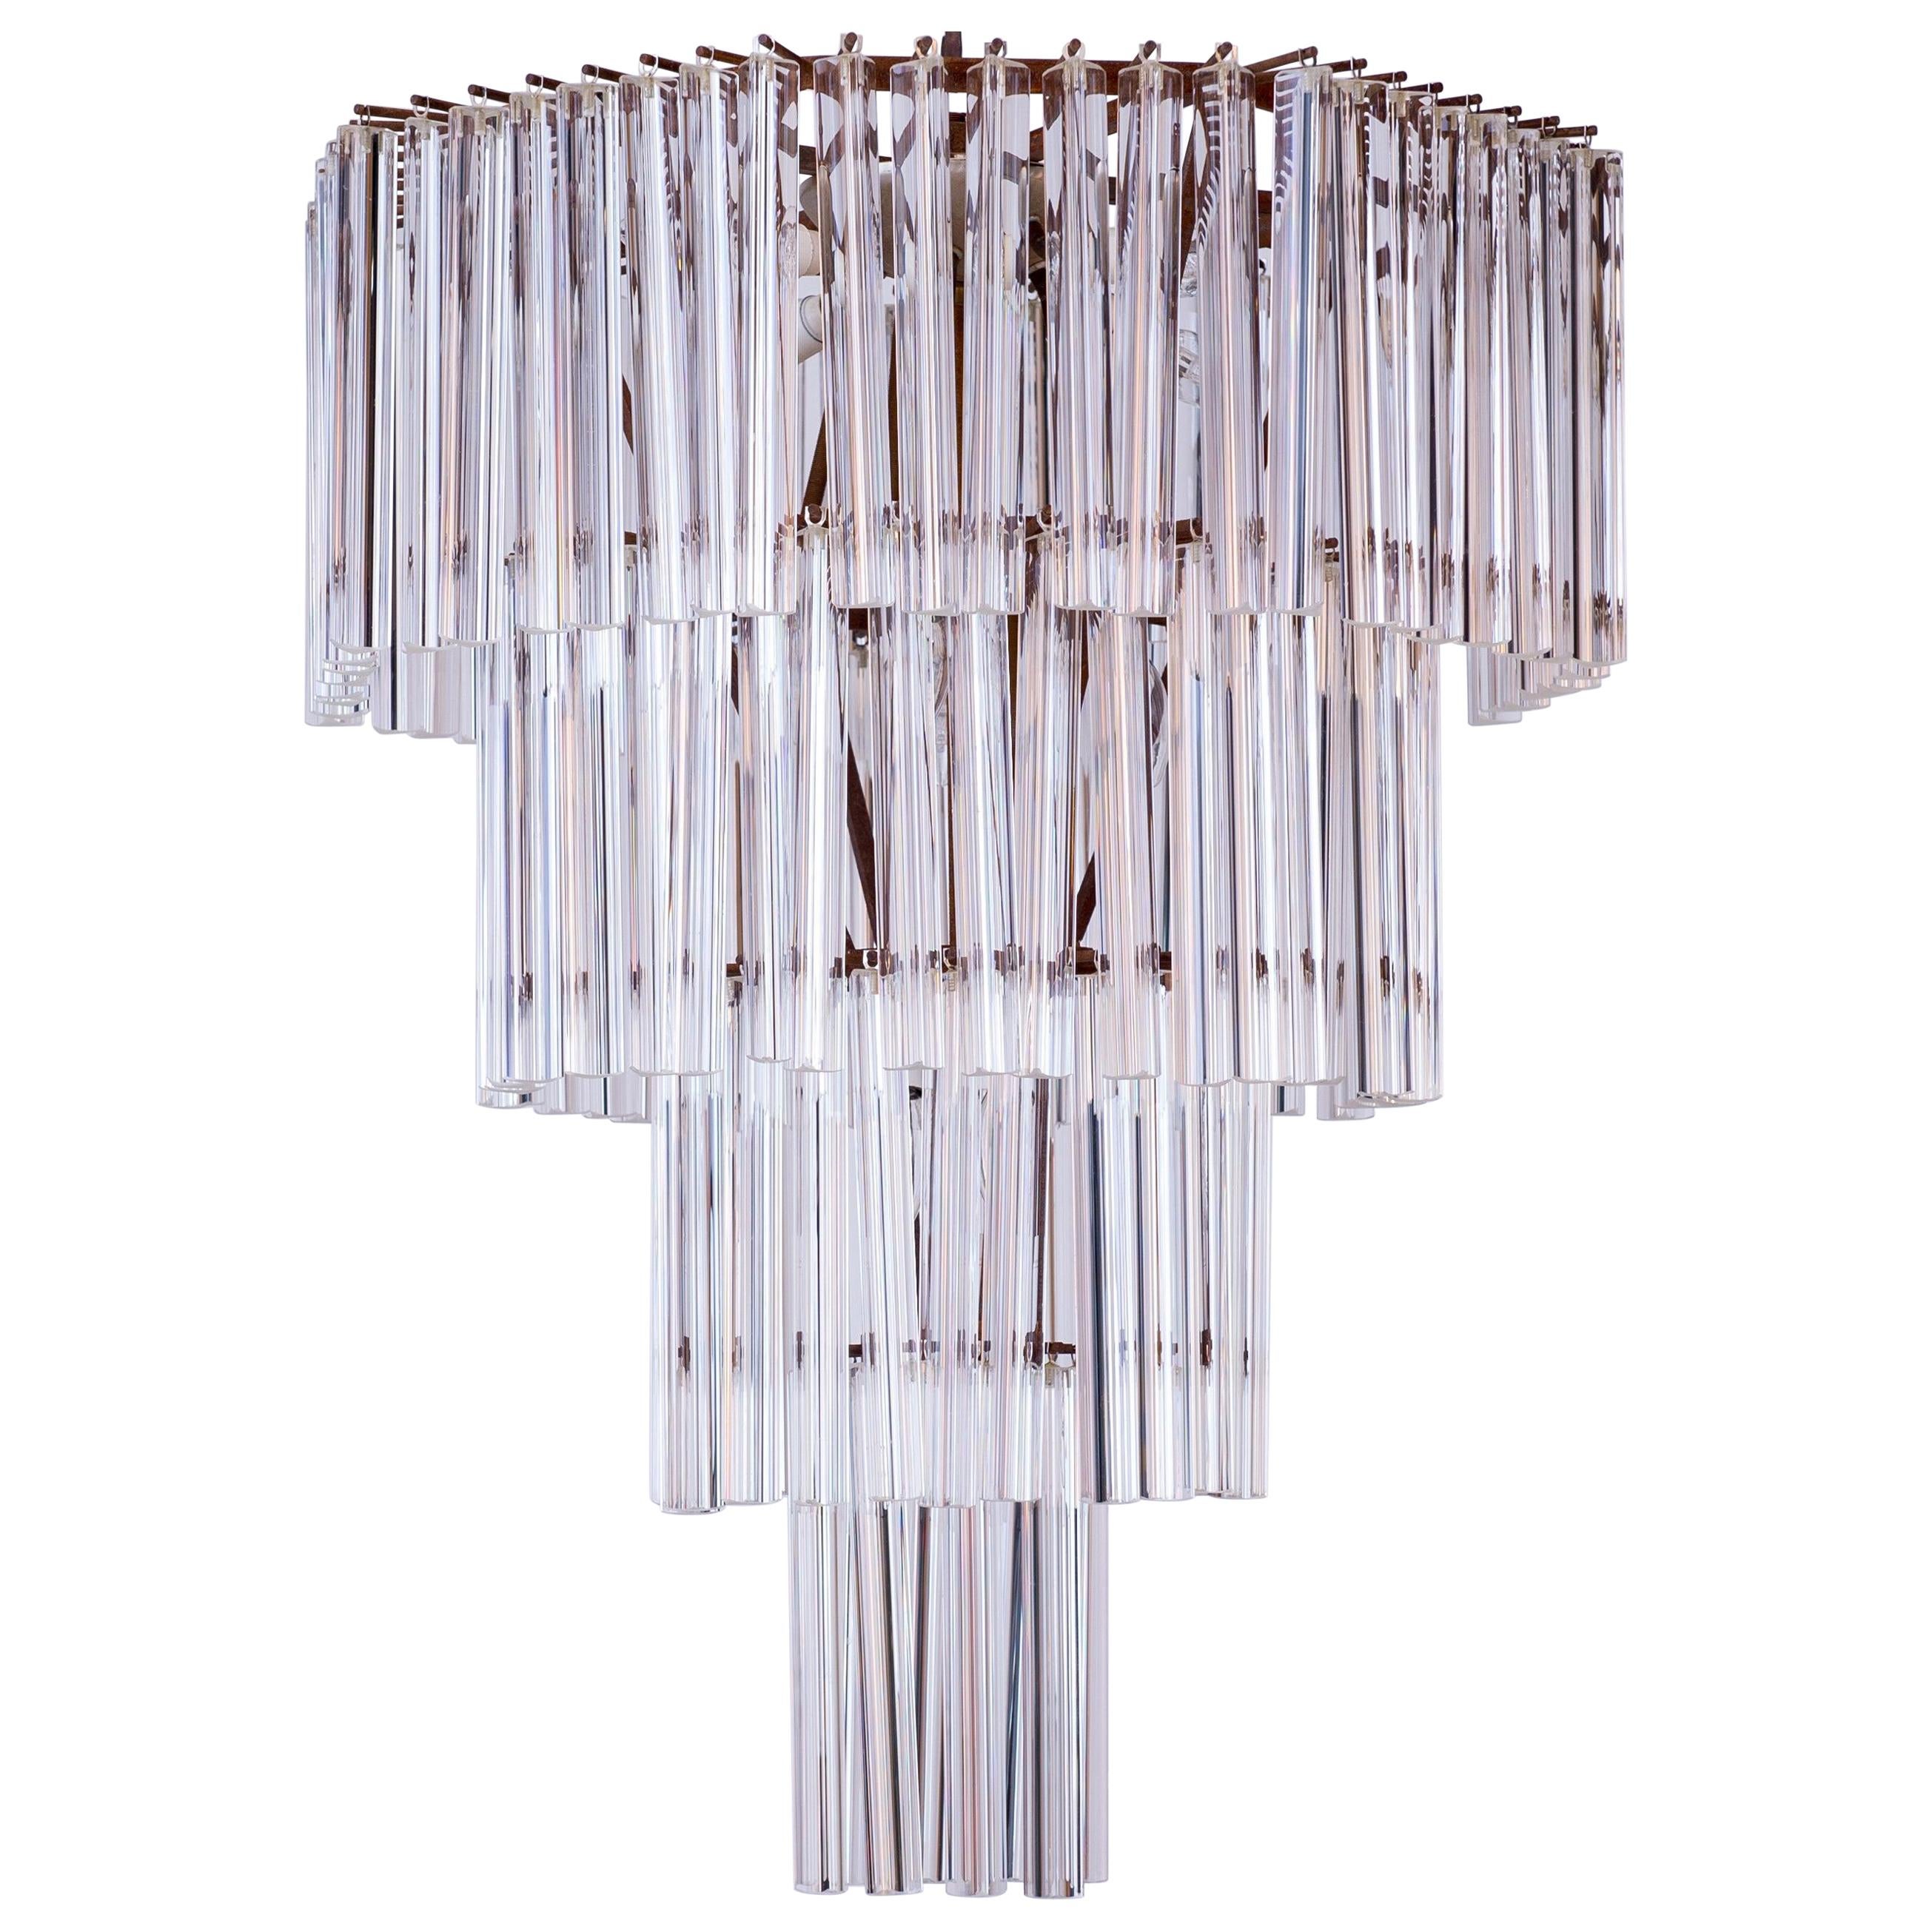 Vintage Trihedron Chandelier in Murano Glass Attributed to Venini, 1970s Italy